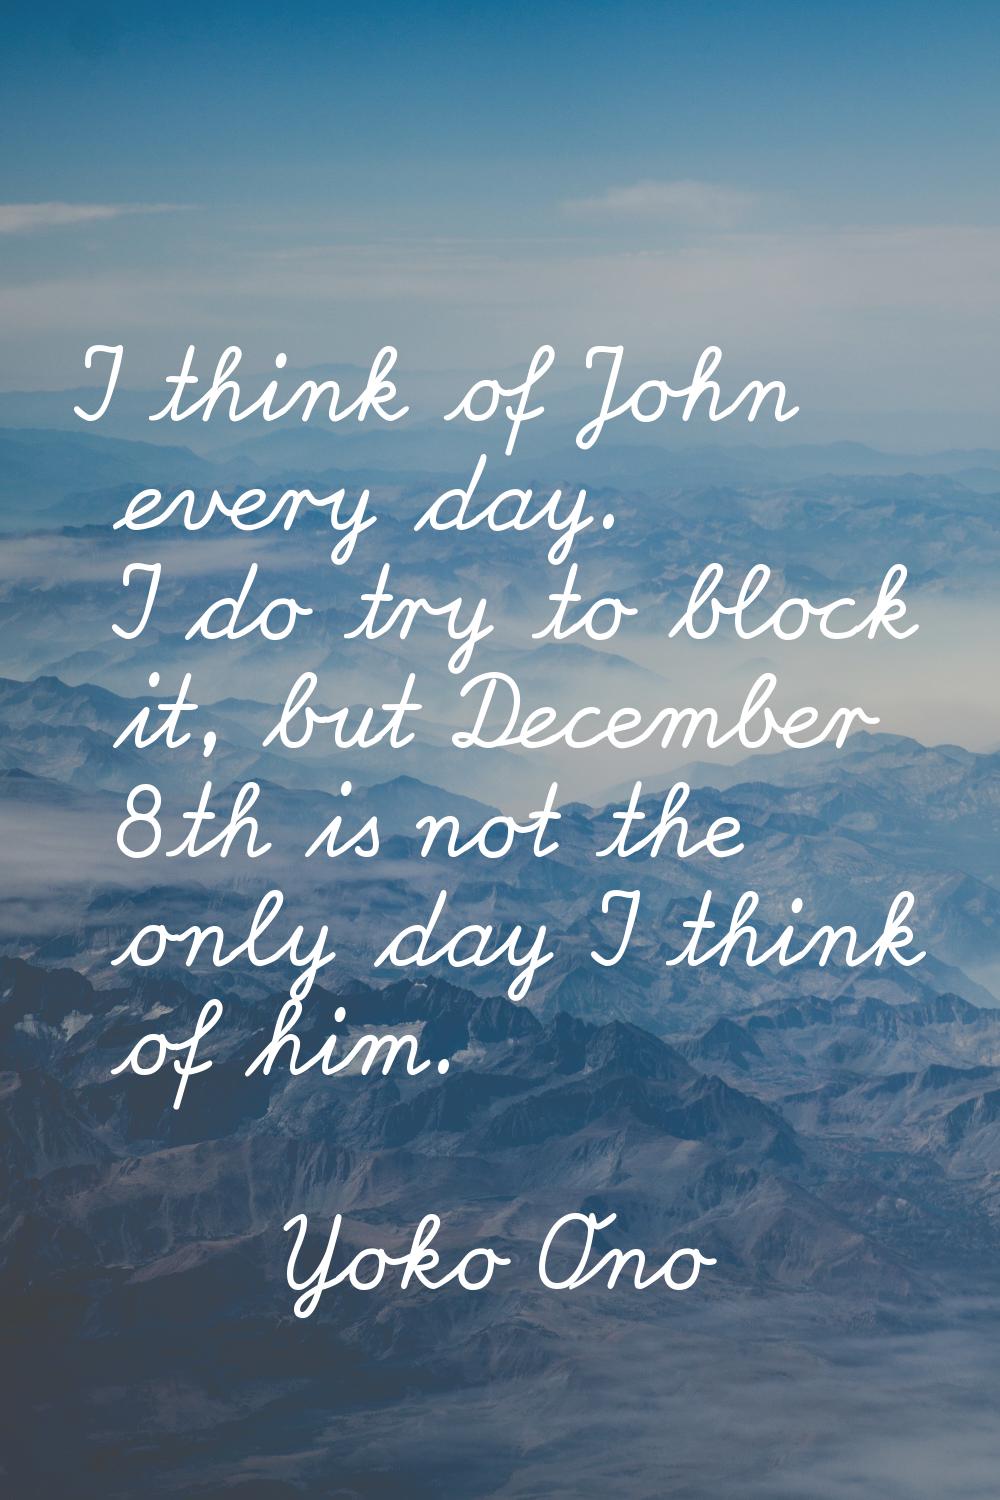 I think of John every day. I do try to block it, but December 8th is not the only day I think of hi